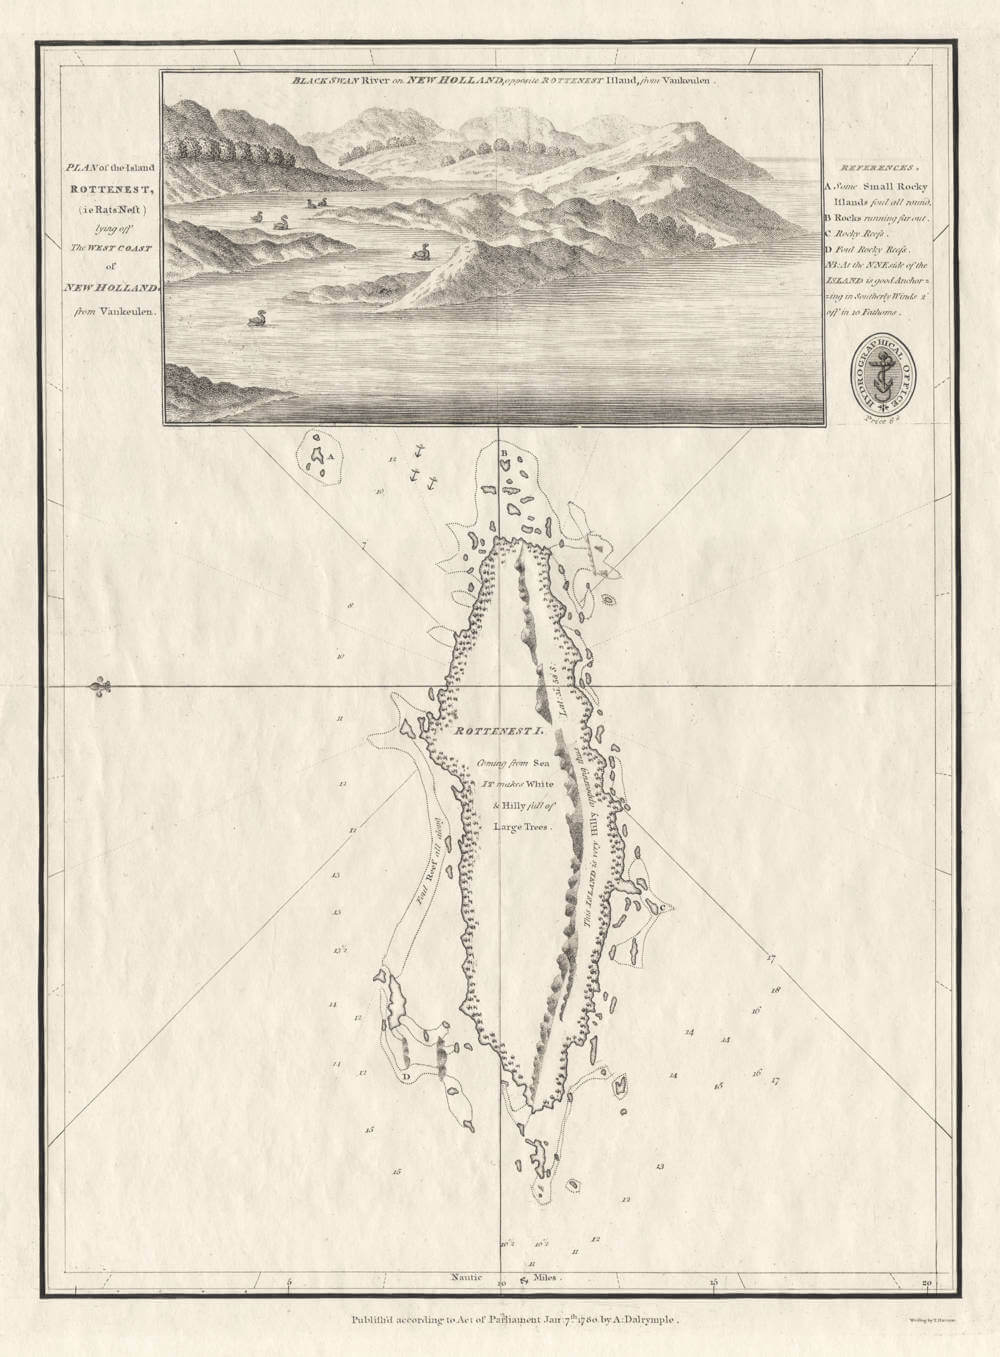 Antique chart of Rottnest Island with an inset view of the Swan River